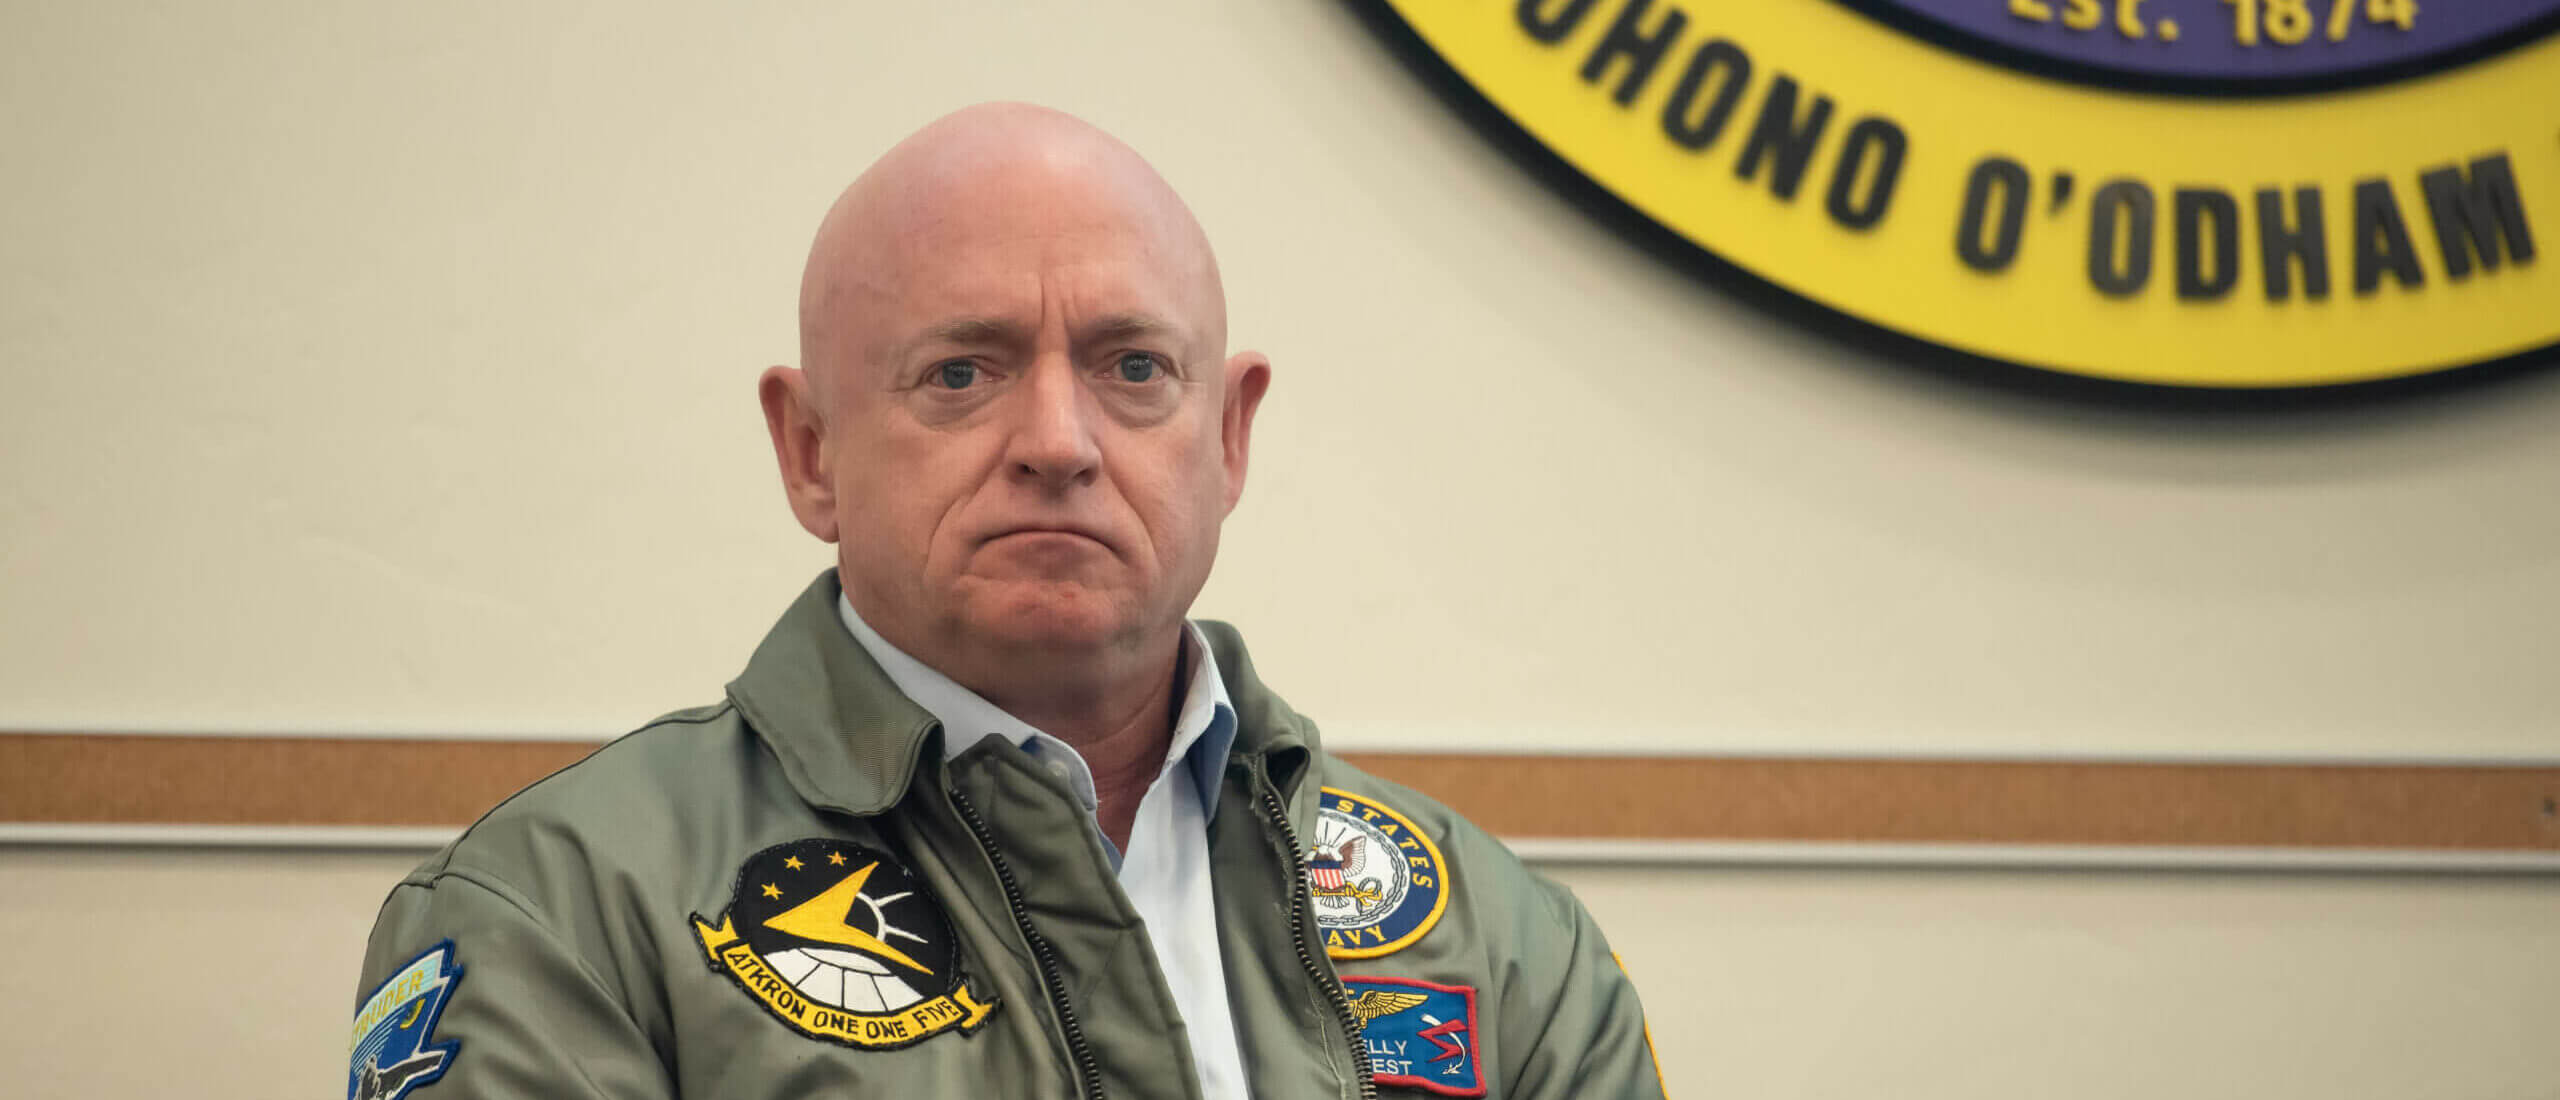 Mark Kelly Staffer Caught on Tape Admitting Campaign ‘Plays Both Sides’ on Abortion to Win Over Undecided Voters › American Greatness